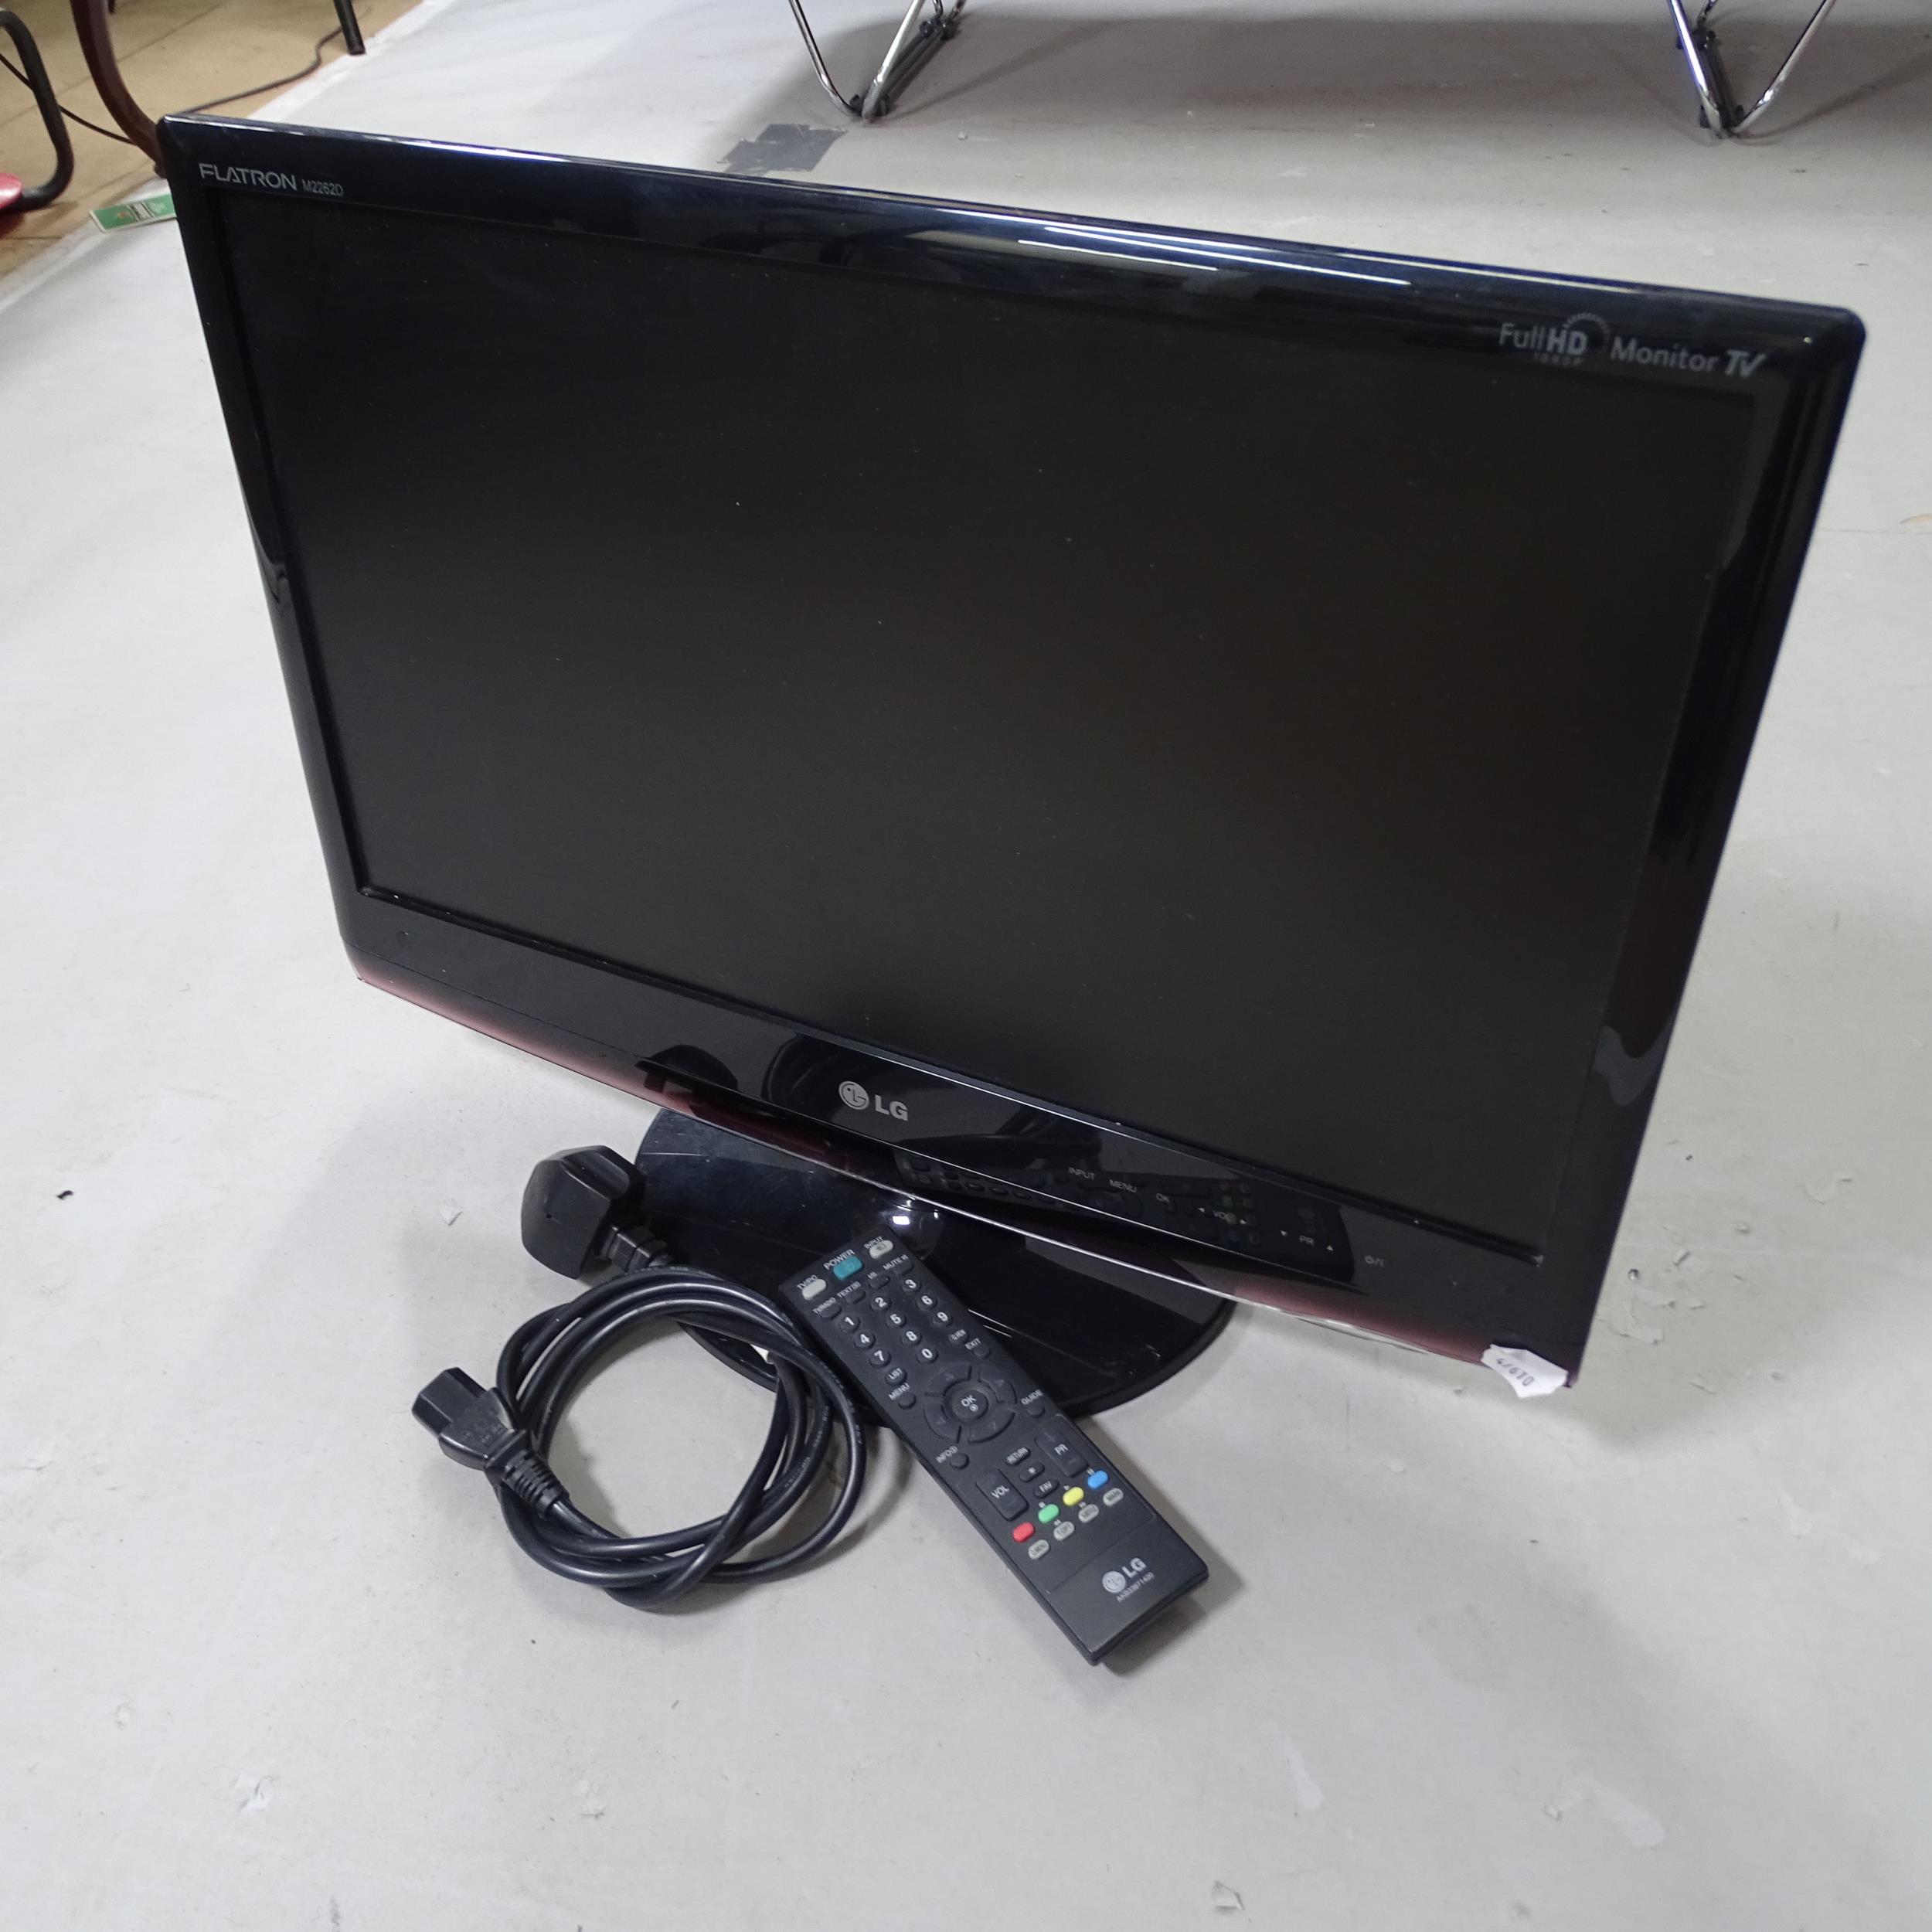 An LG Flatron M2262D 22" TV, with remote control